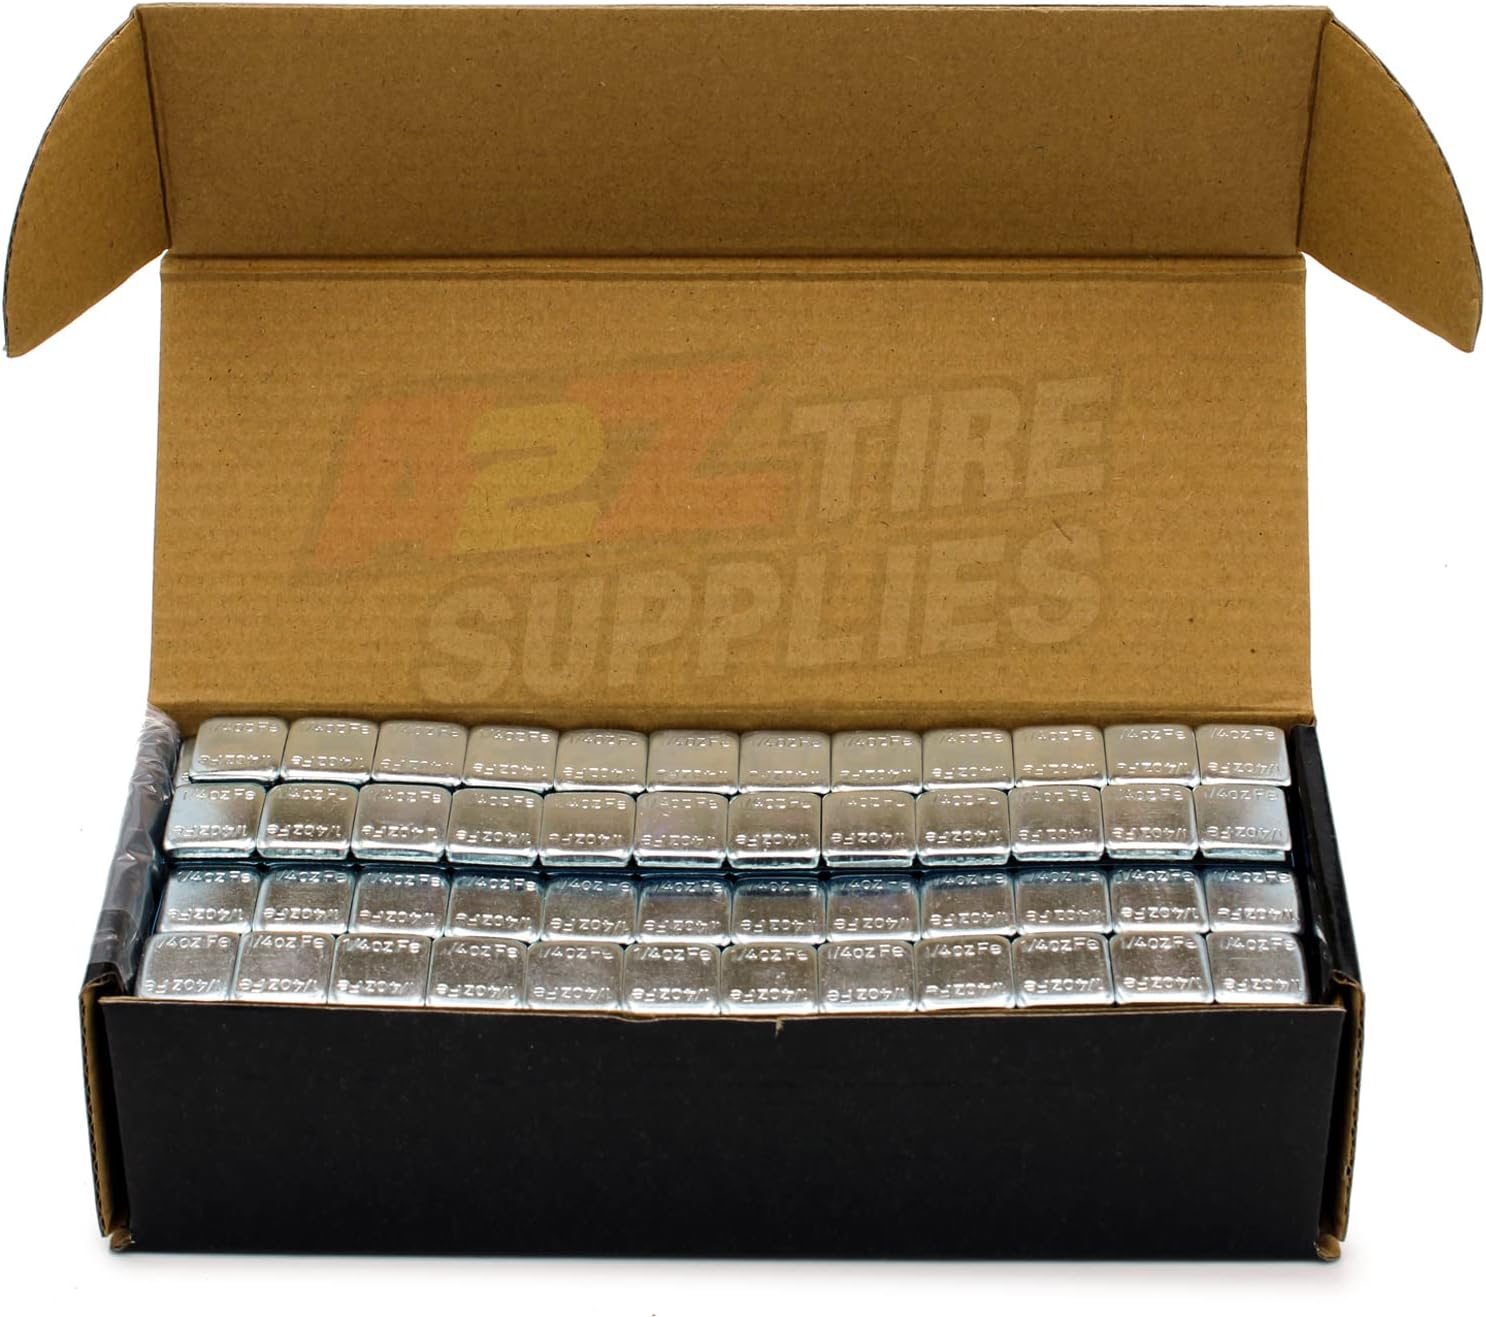 A2Z TIRE SUPPLIES 3600 pcs Zinc Plated FE Low Profile Adhesive Wheel Weight 1/4oz Segments 300 Strips 54 Lbs. for Car, SUV, Truck Specially Made for US Market